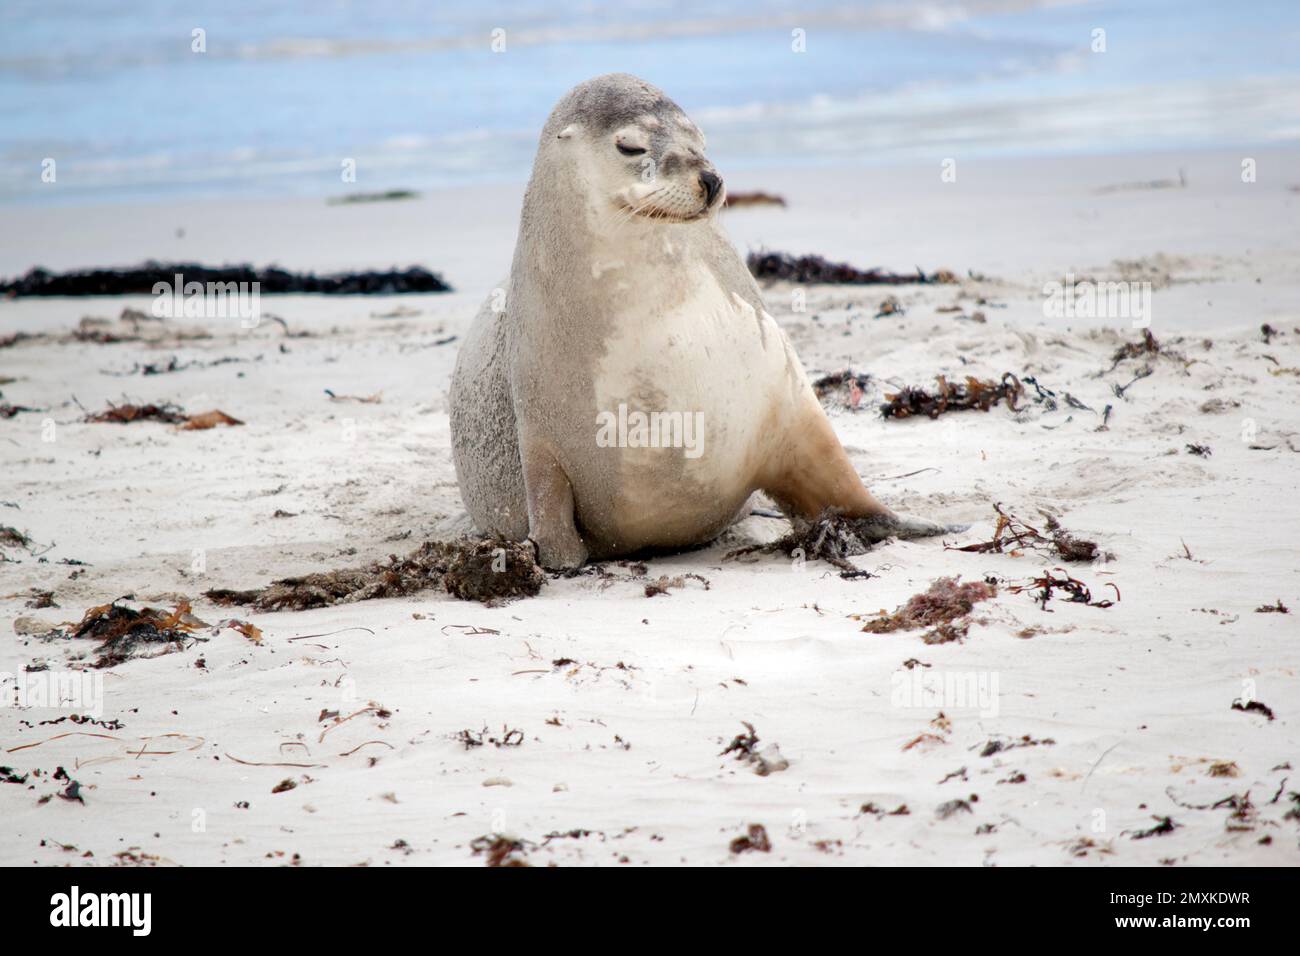 the sea lion is walking on the beach looking for her pup Stock Photo